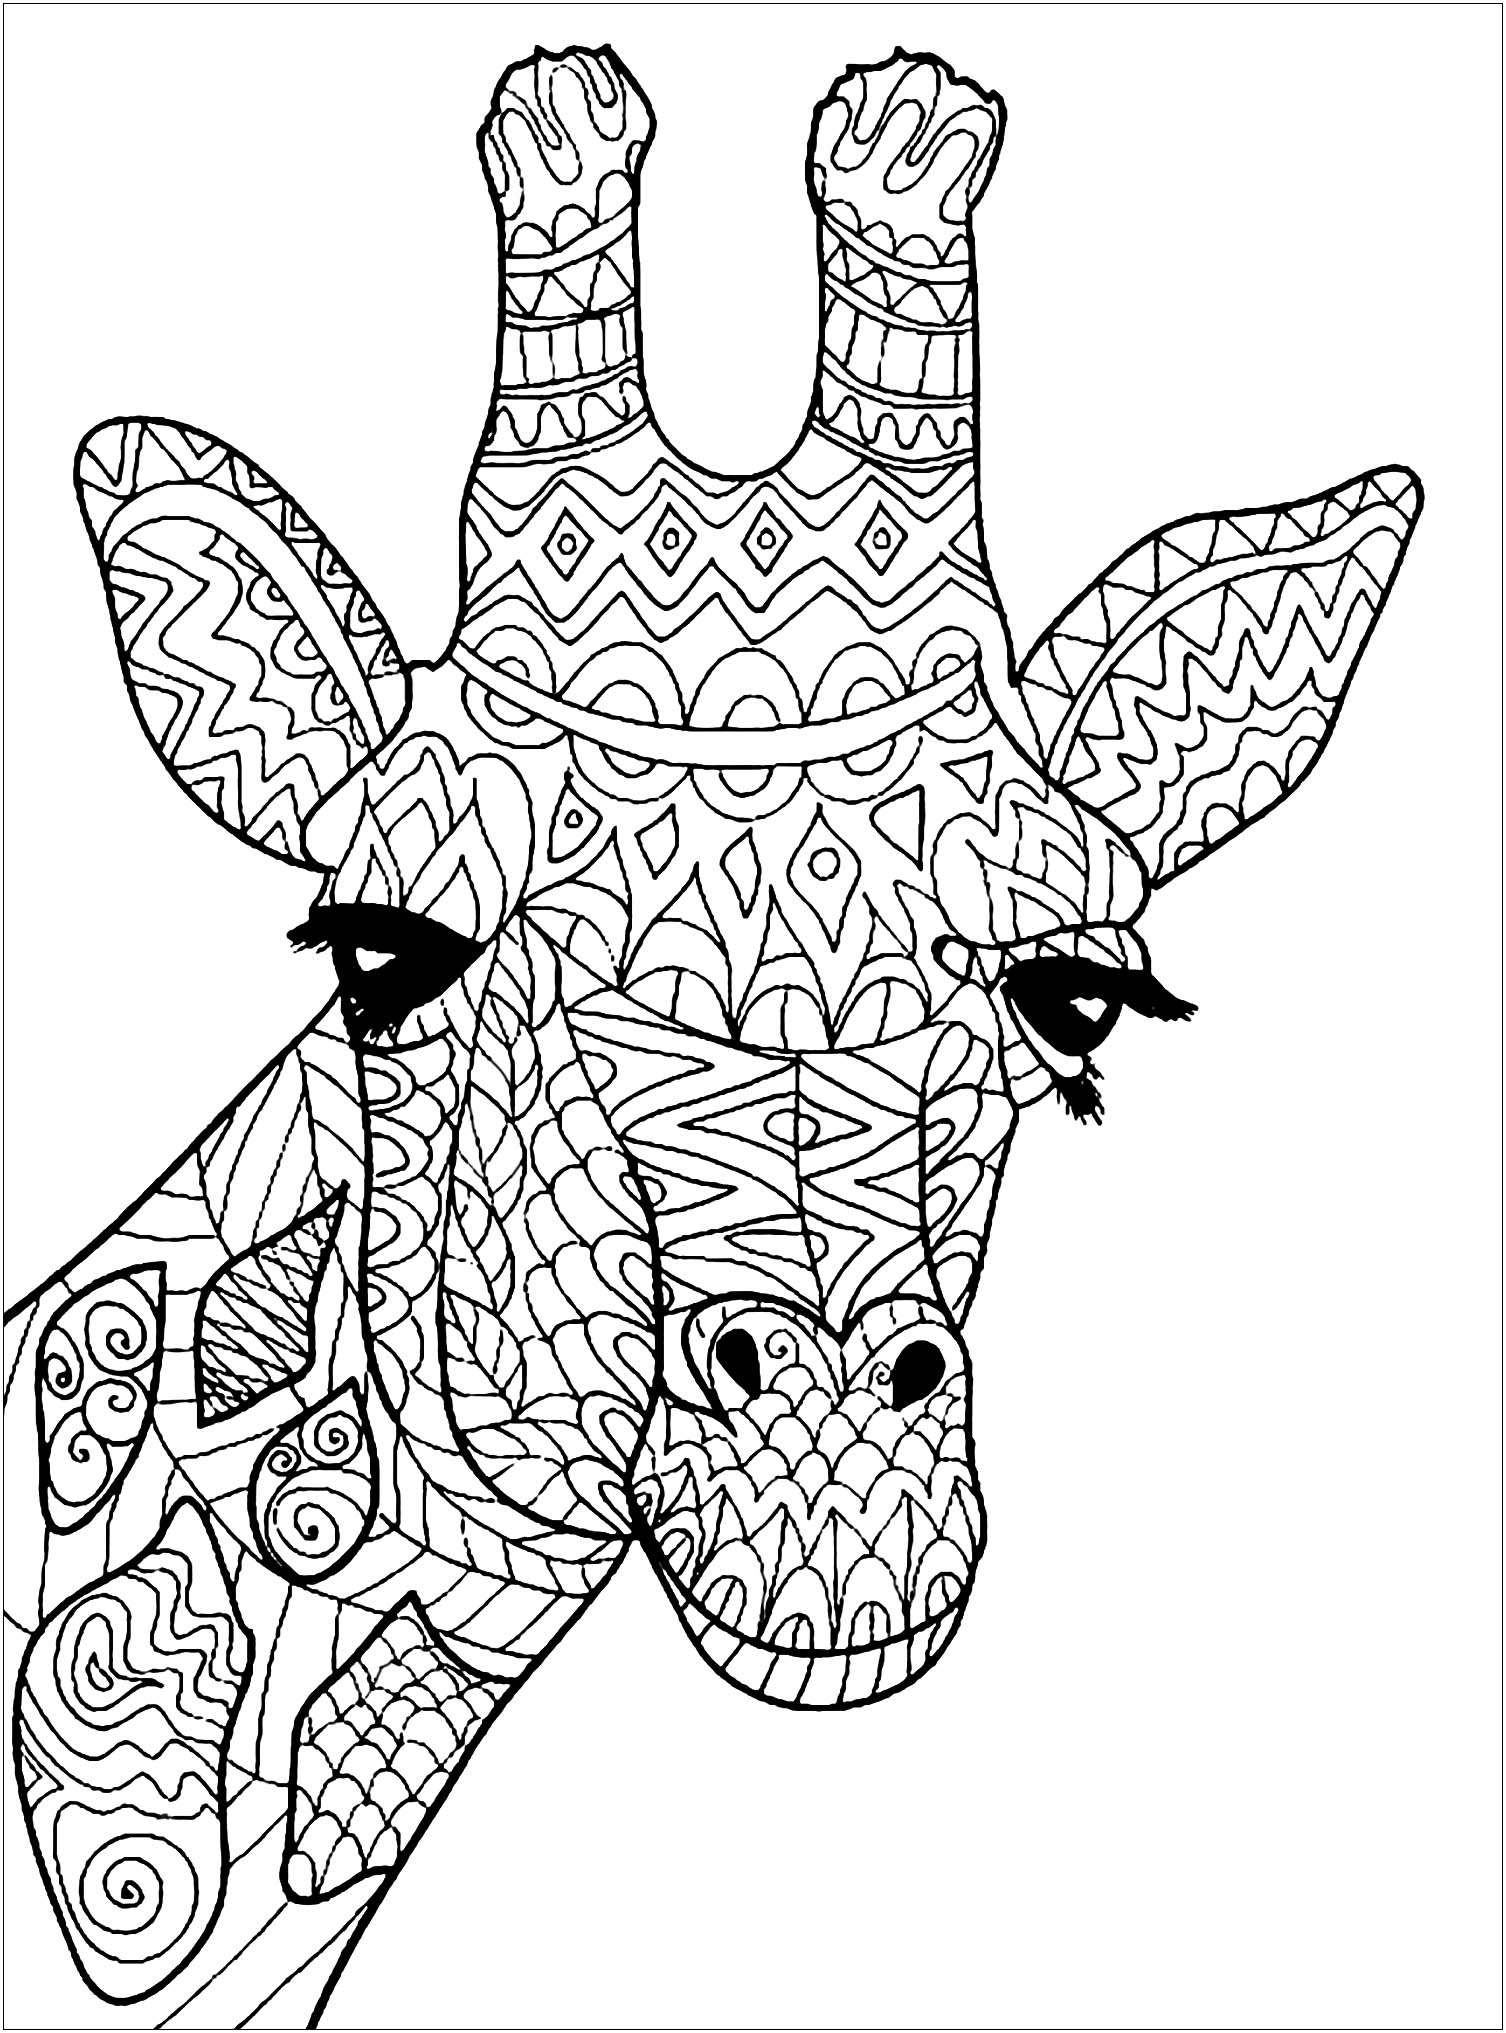 Download Giraffe head - Giraffes Adult Coloring Pages